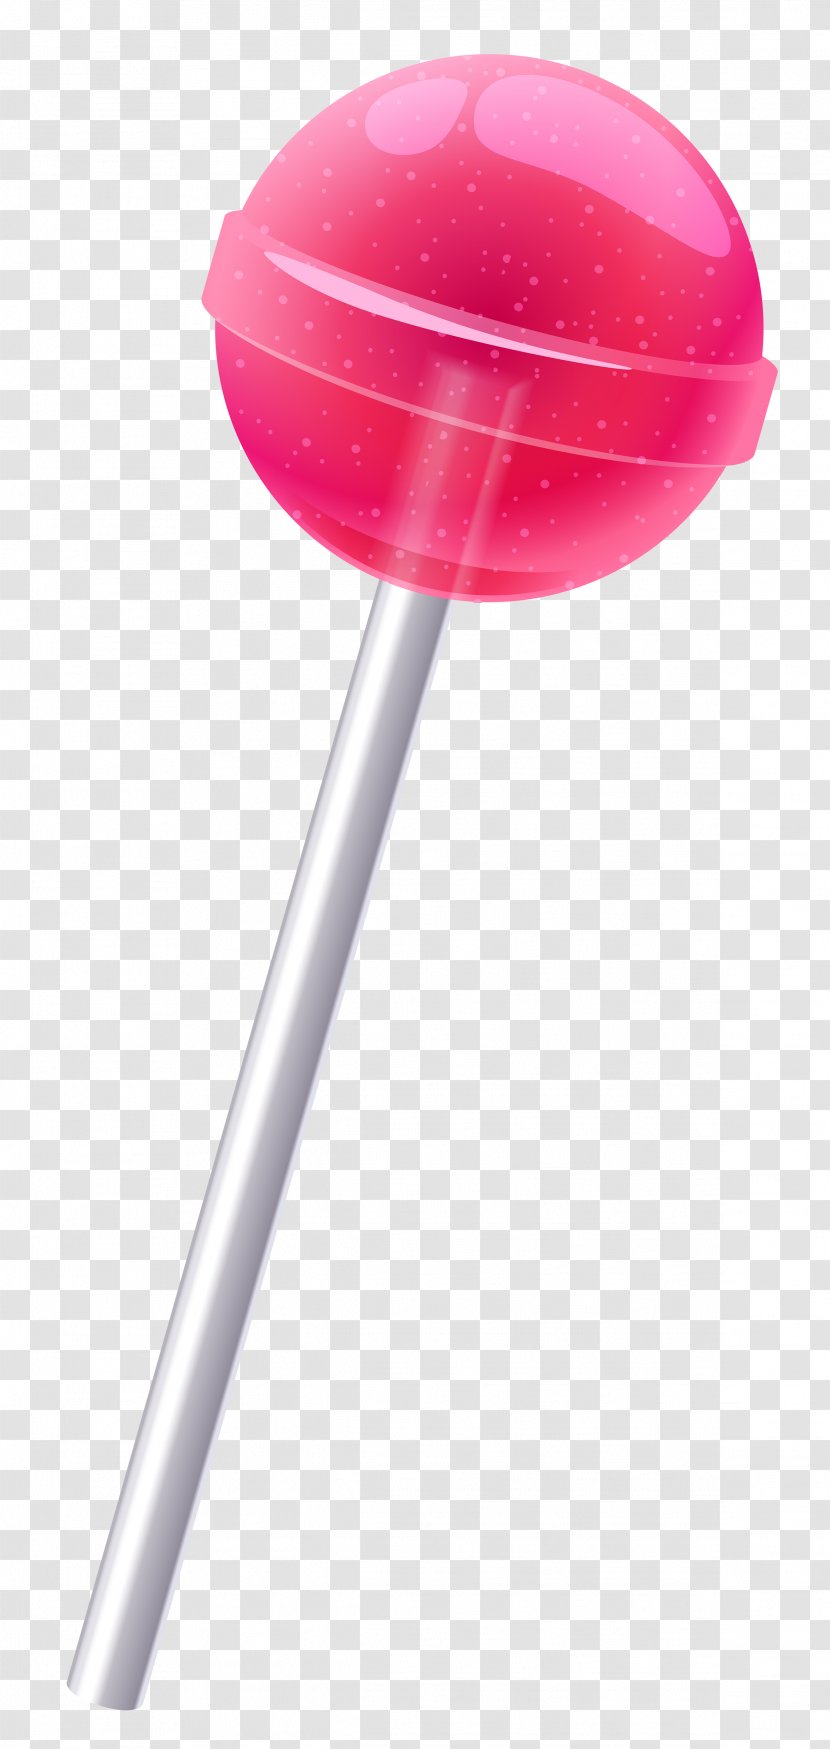 Lollipop Candy Chupa Chups - Confectionery - Pink Clipart Picture Transparent PNG